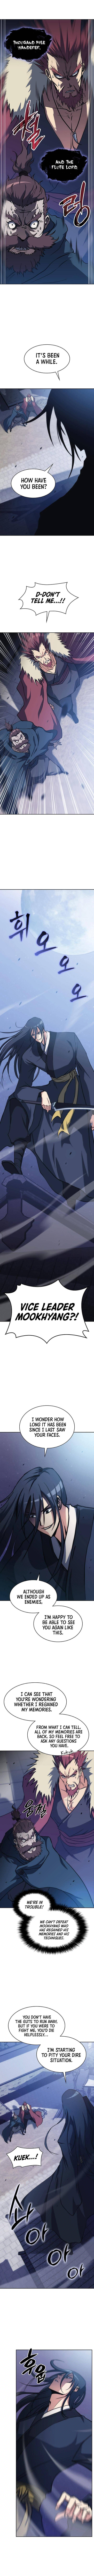 MookHyang - The Origin Chapter 39 page 3